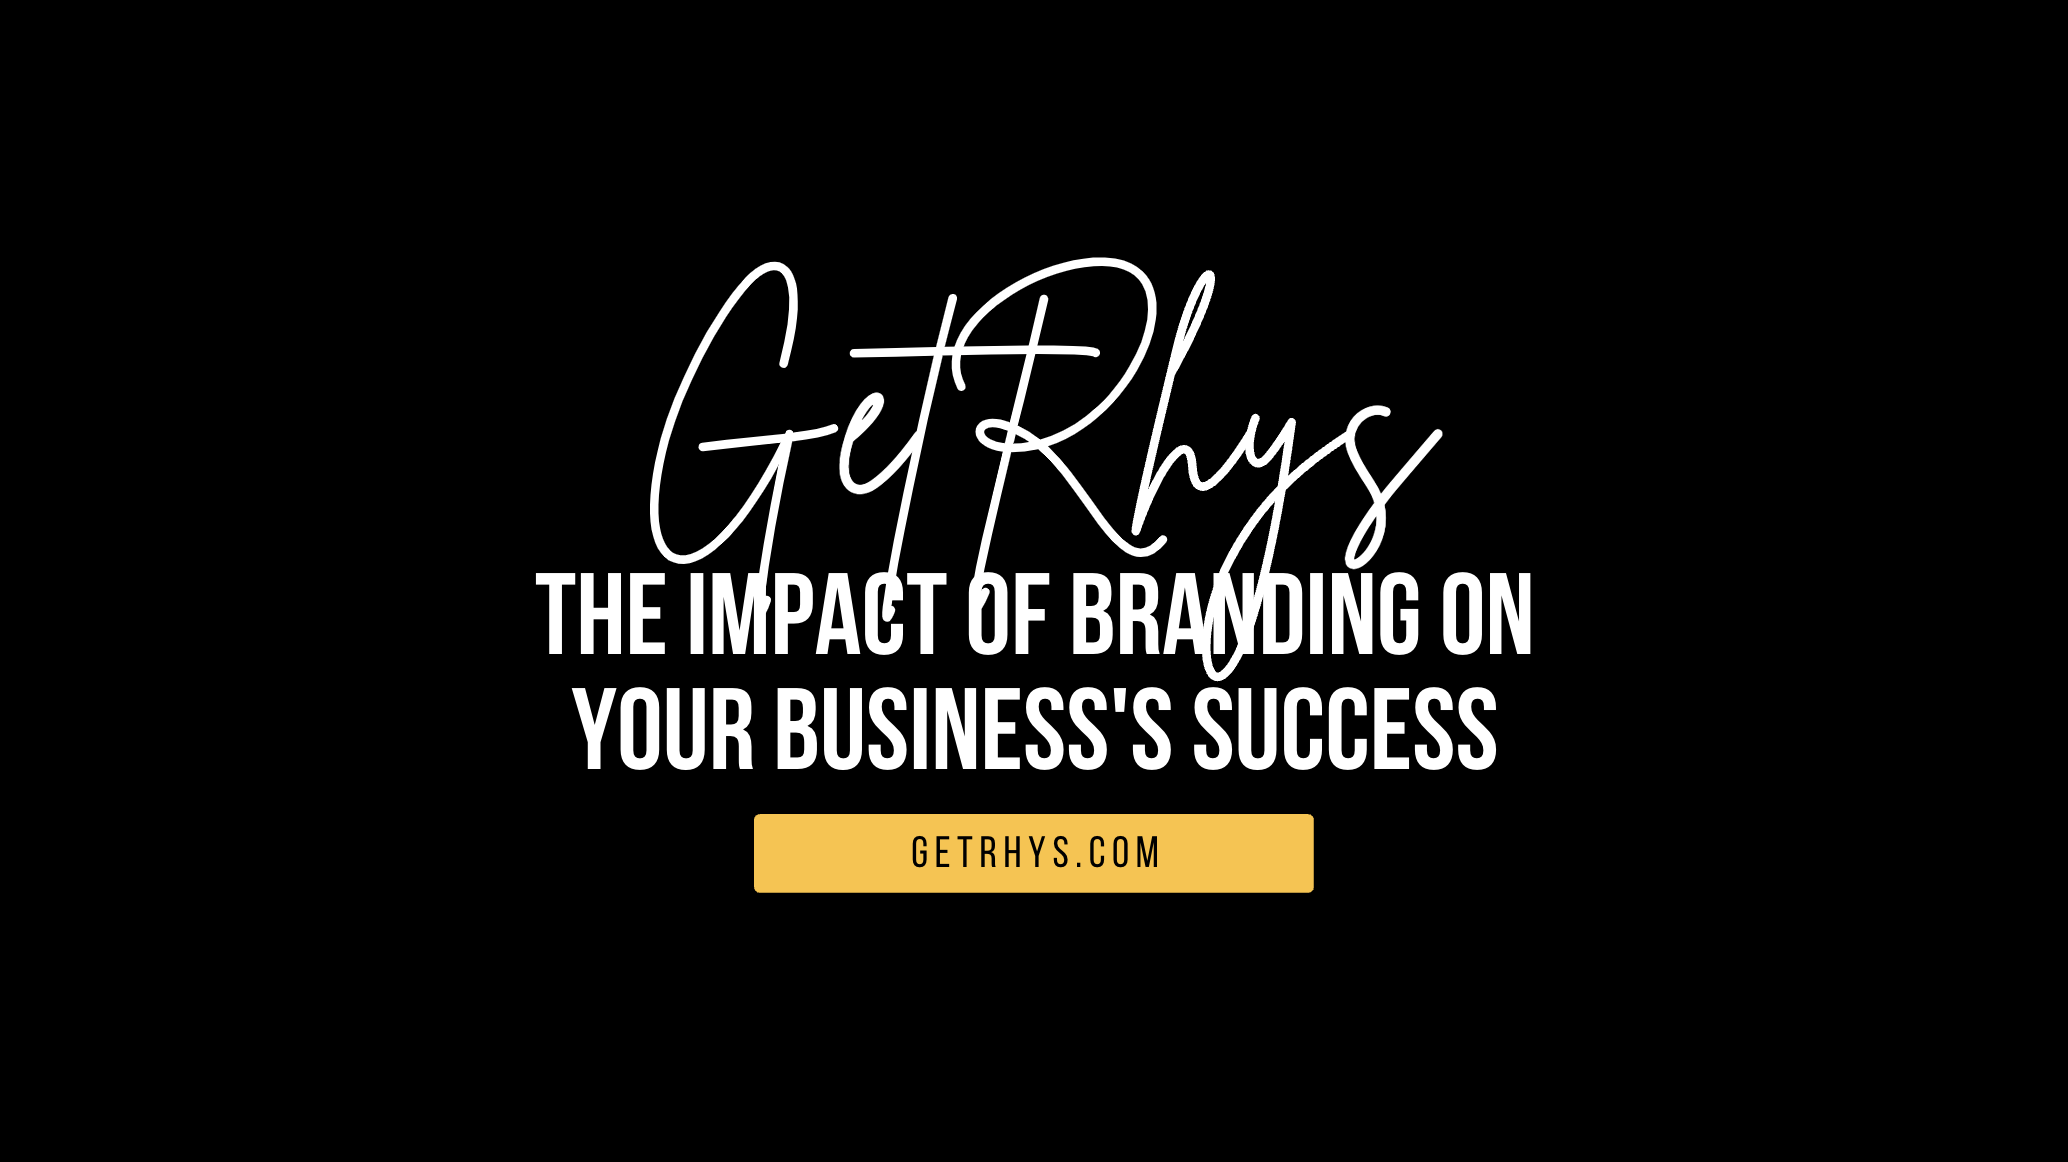 The impact of branding on your business's success